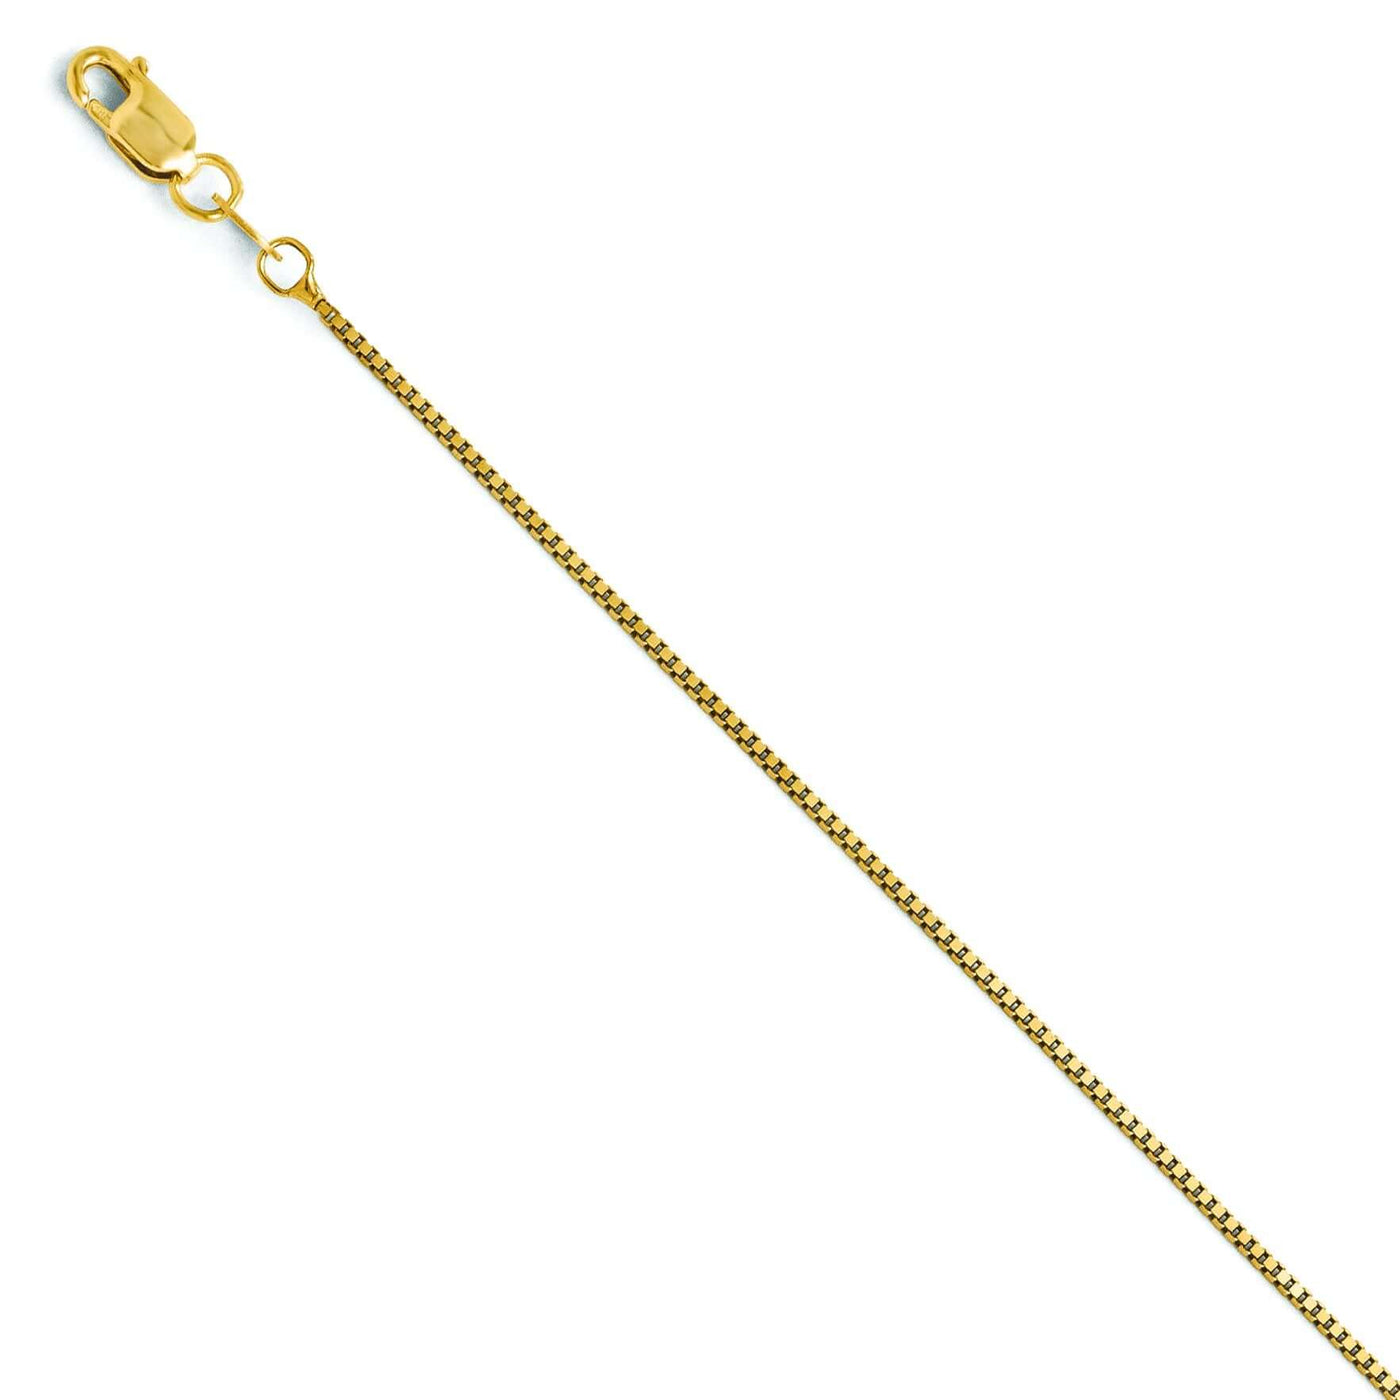 14K 18" BOX WITH LOBSTER CHAIN
502-18